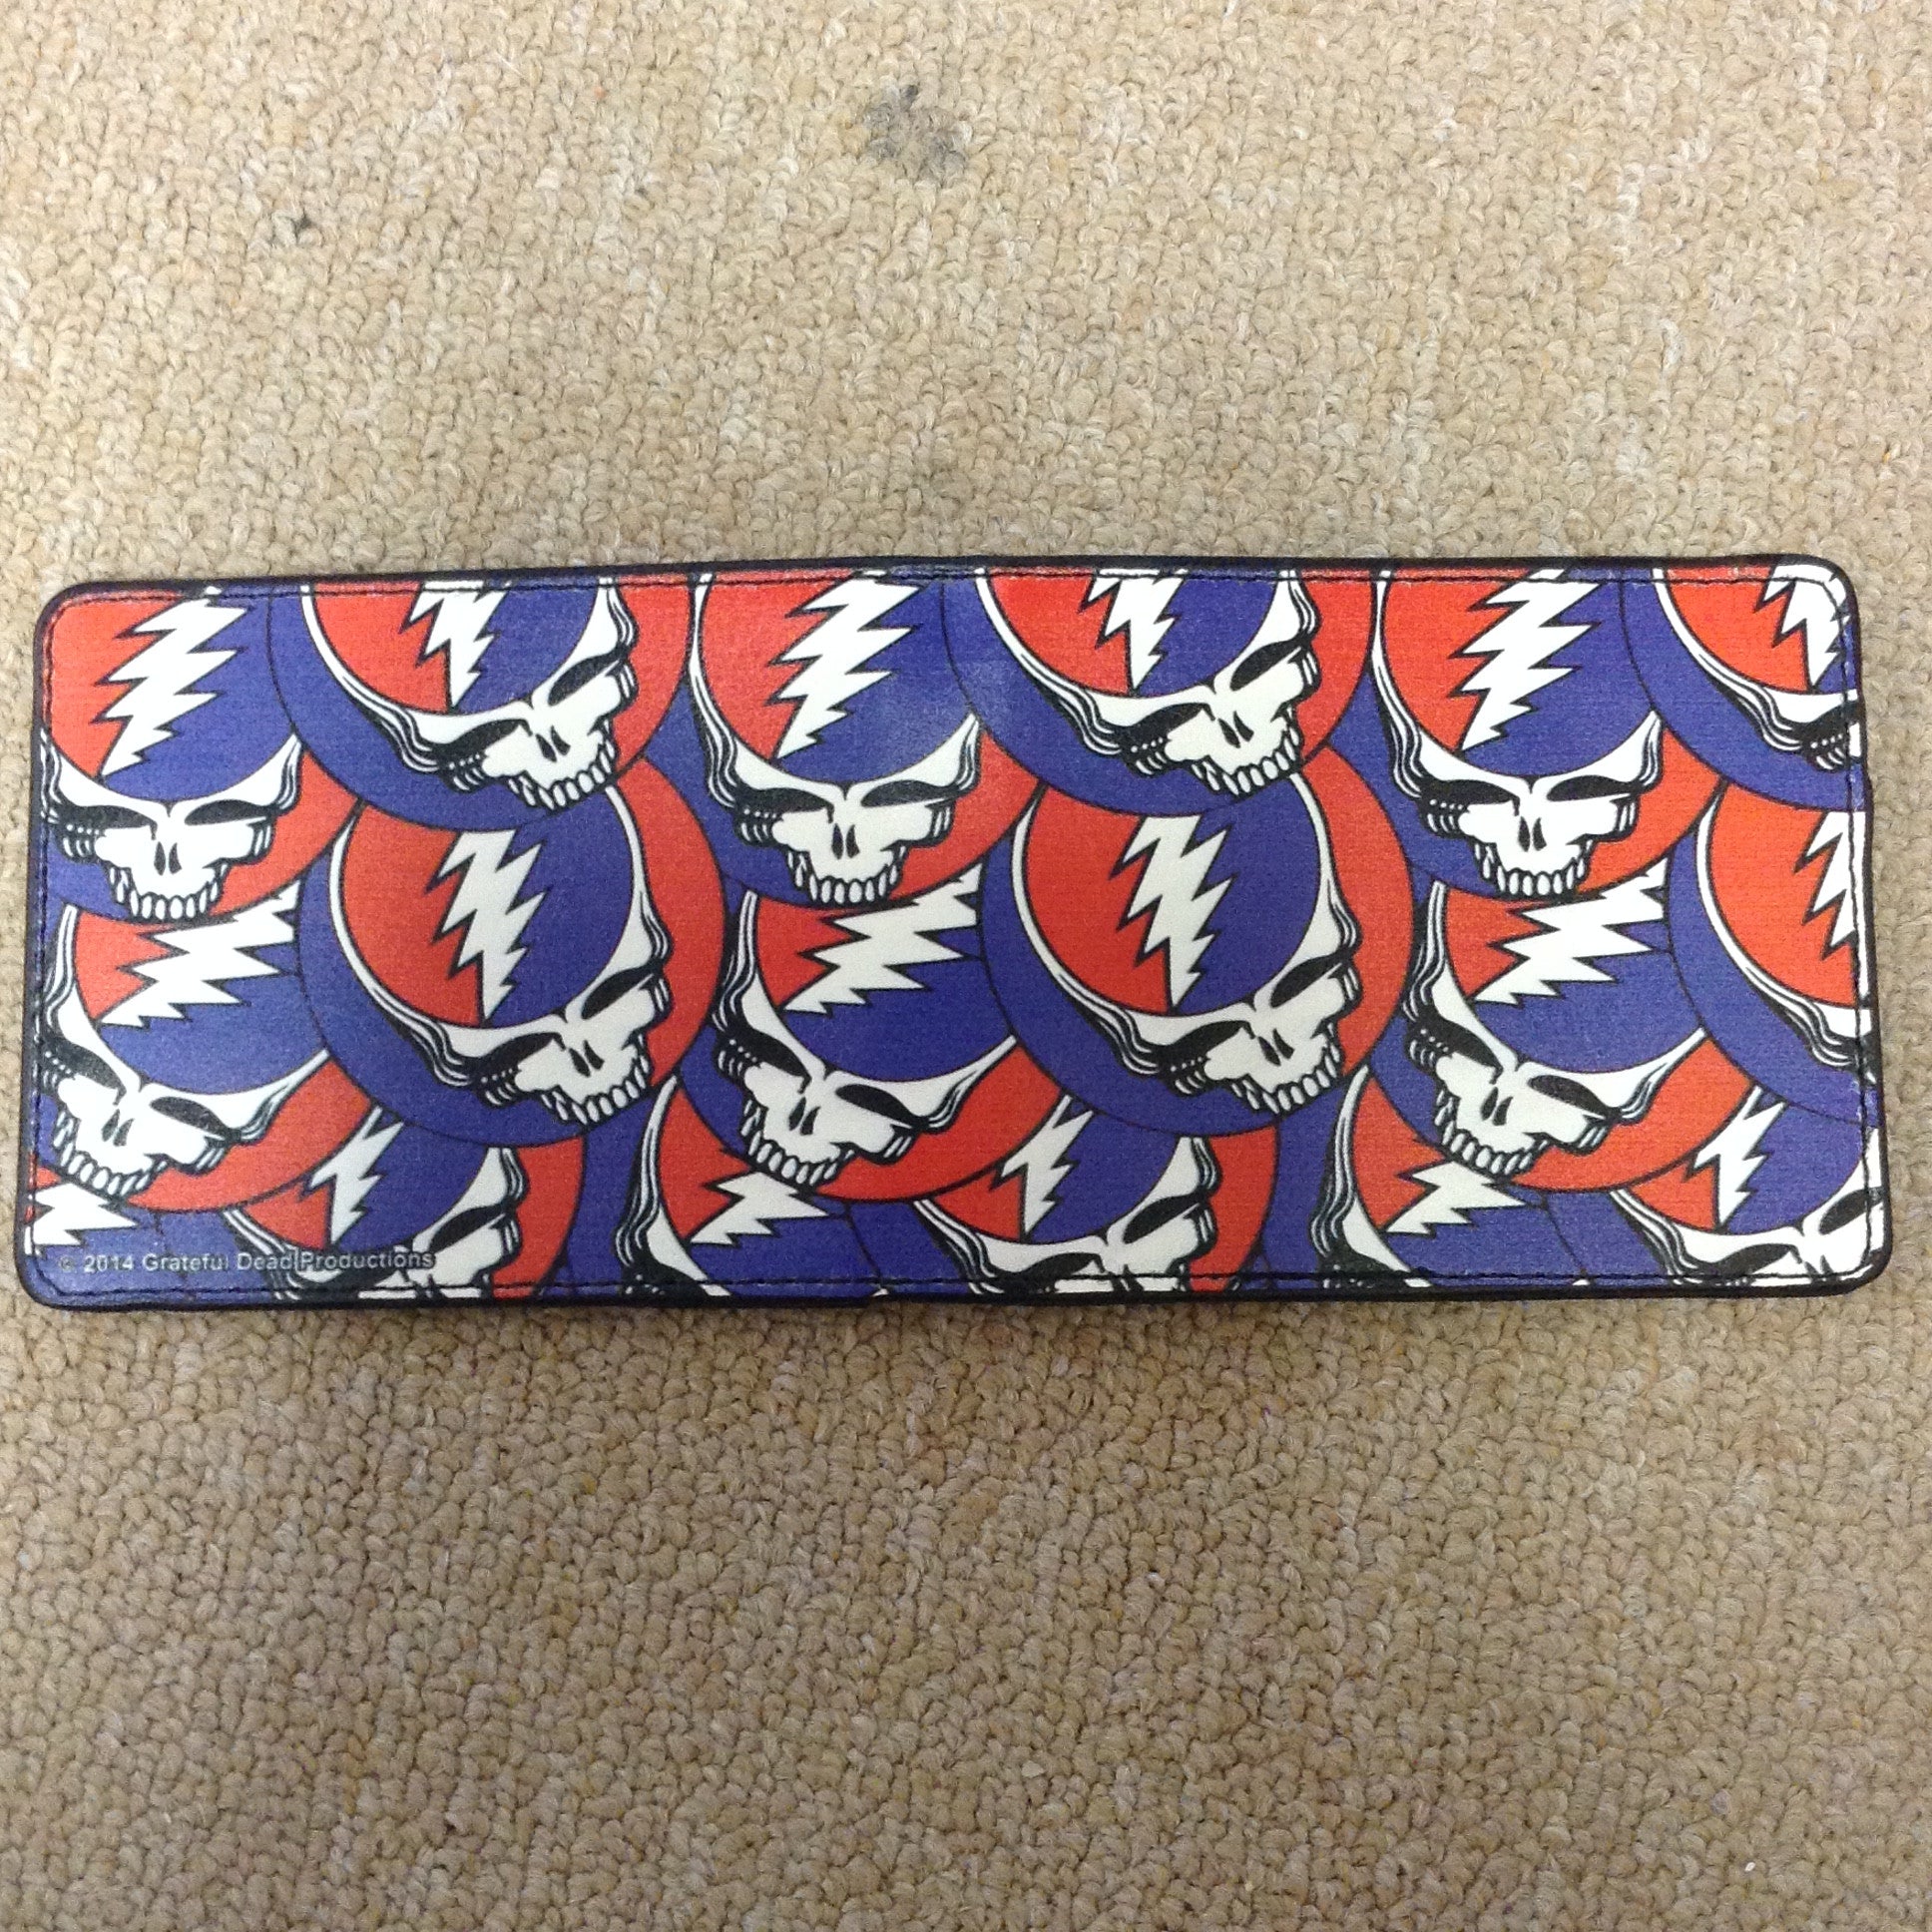 Steal Your Face Collage Bi-Fold Wallet - HalfMoonMusic